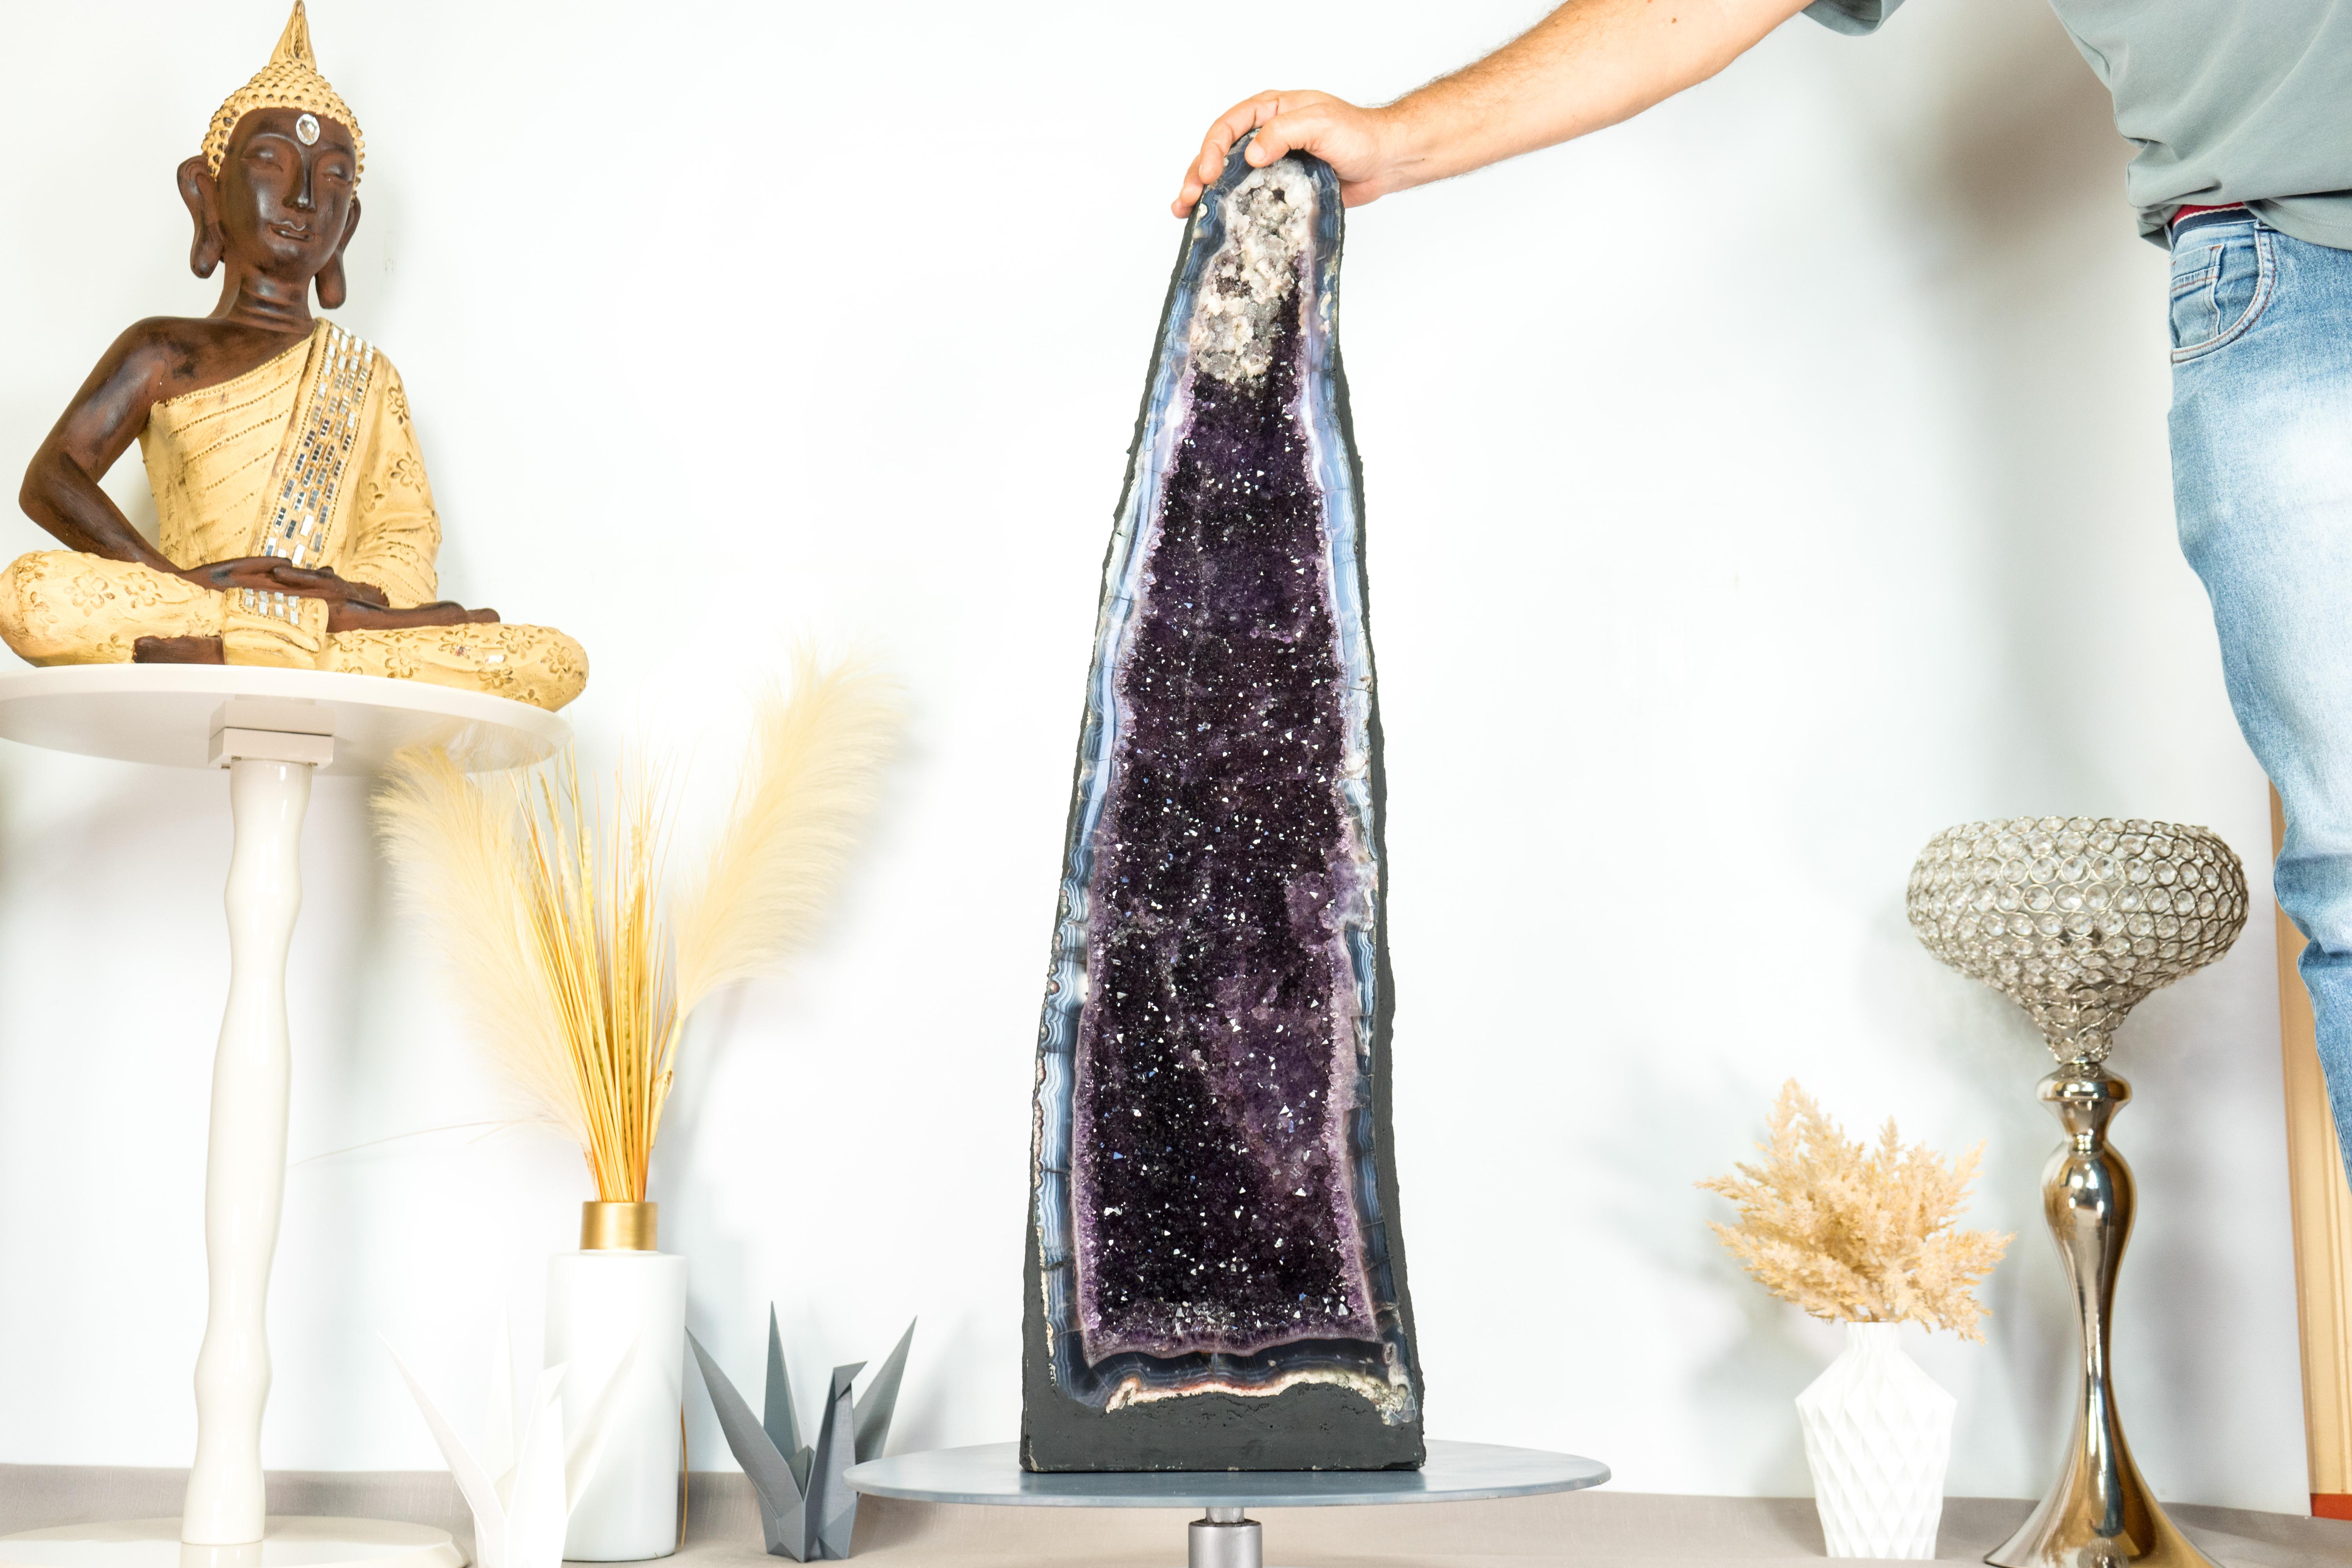 Breathtaking and beautiful, this Agate with Amethyst Geode features spectacular blue-banded agate lines and rare, stunning aesthetics. Enhanced by shiny Amethyst that perfectly complements its beauty, this all-natural artwork is destined to be the